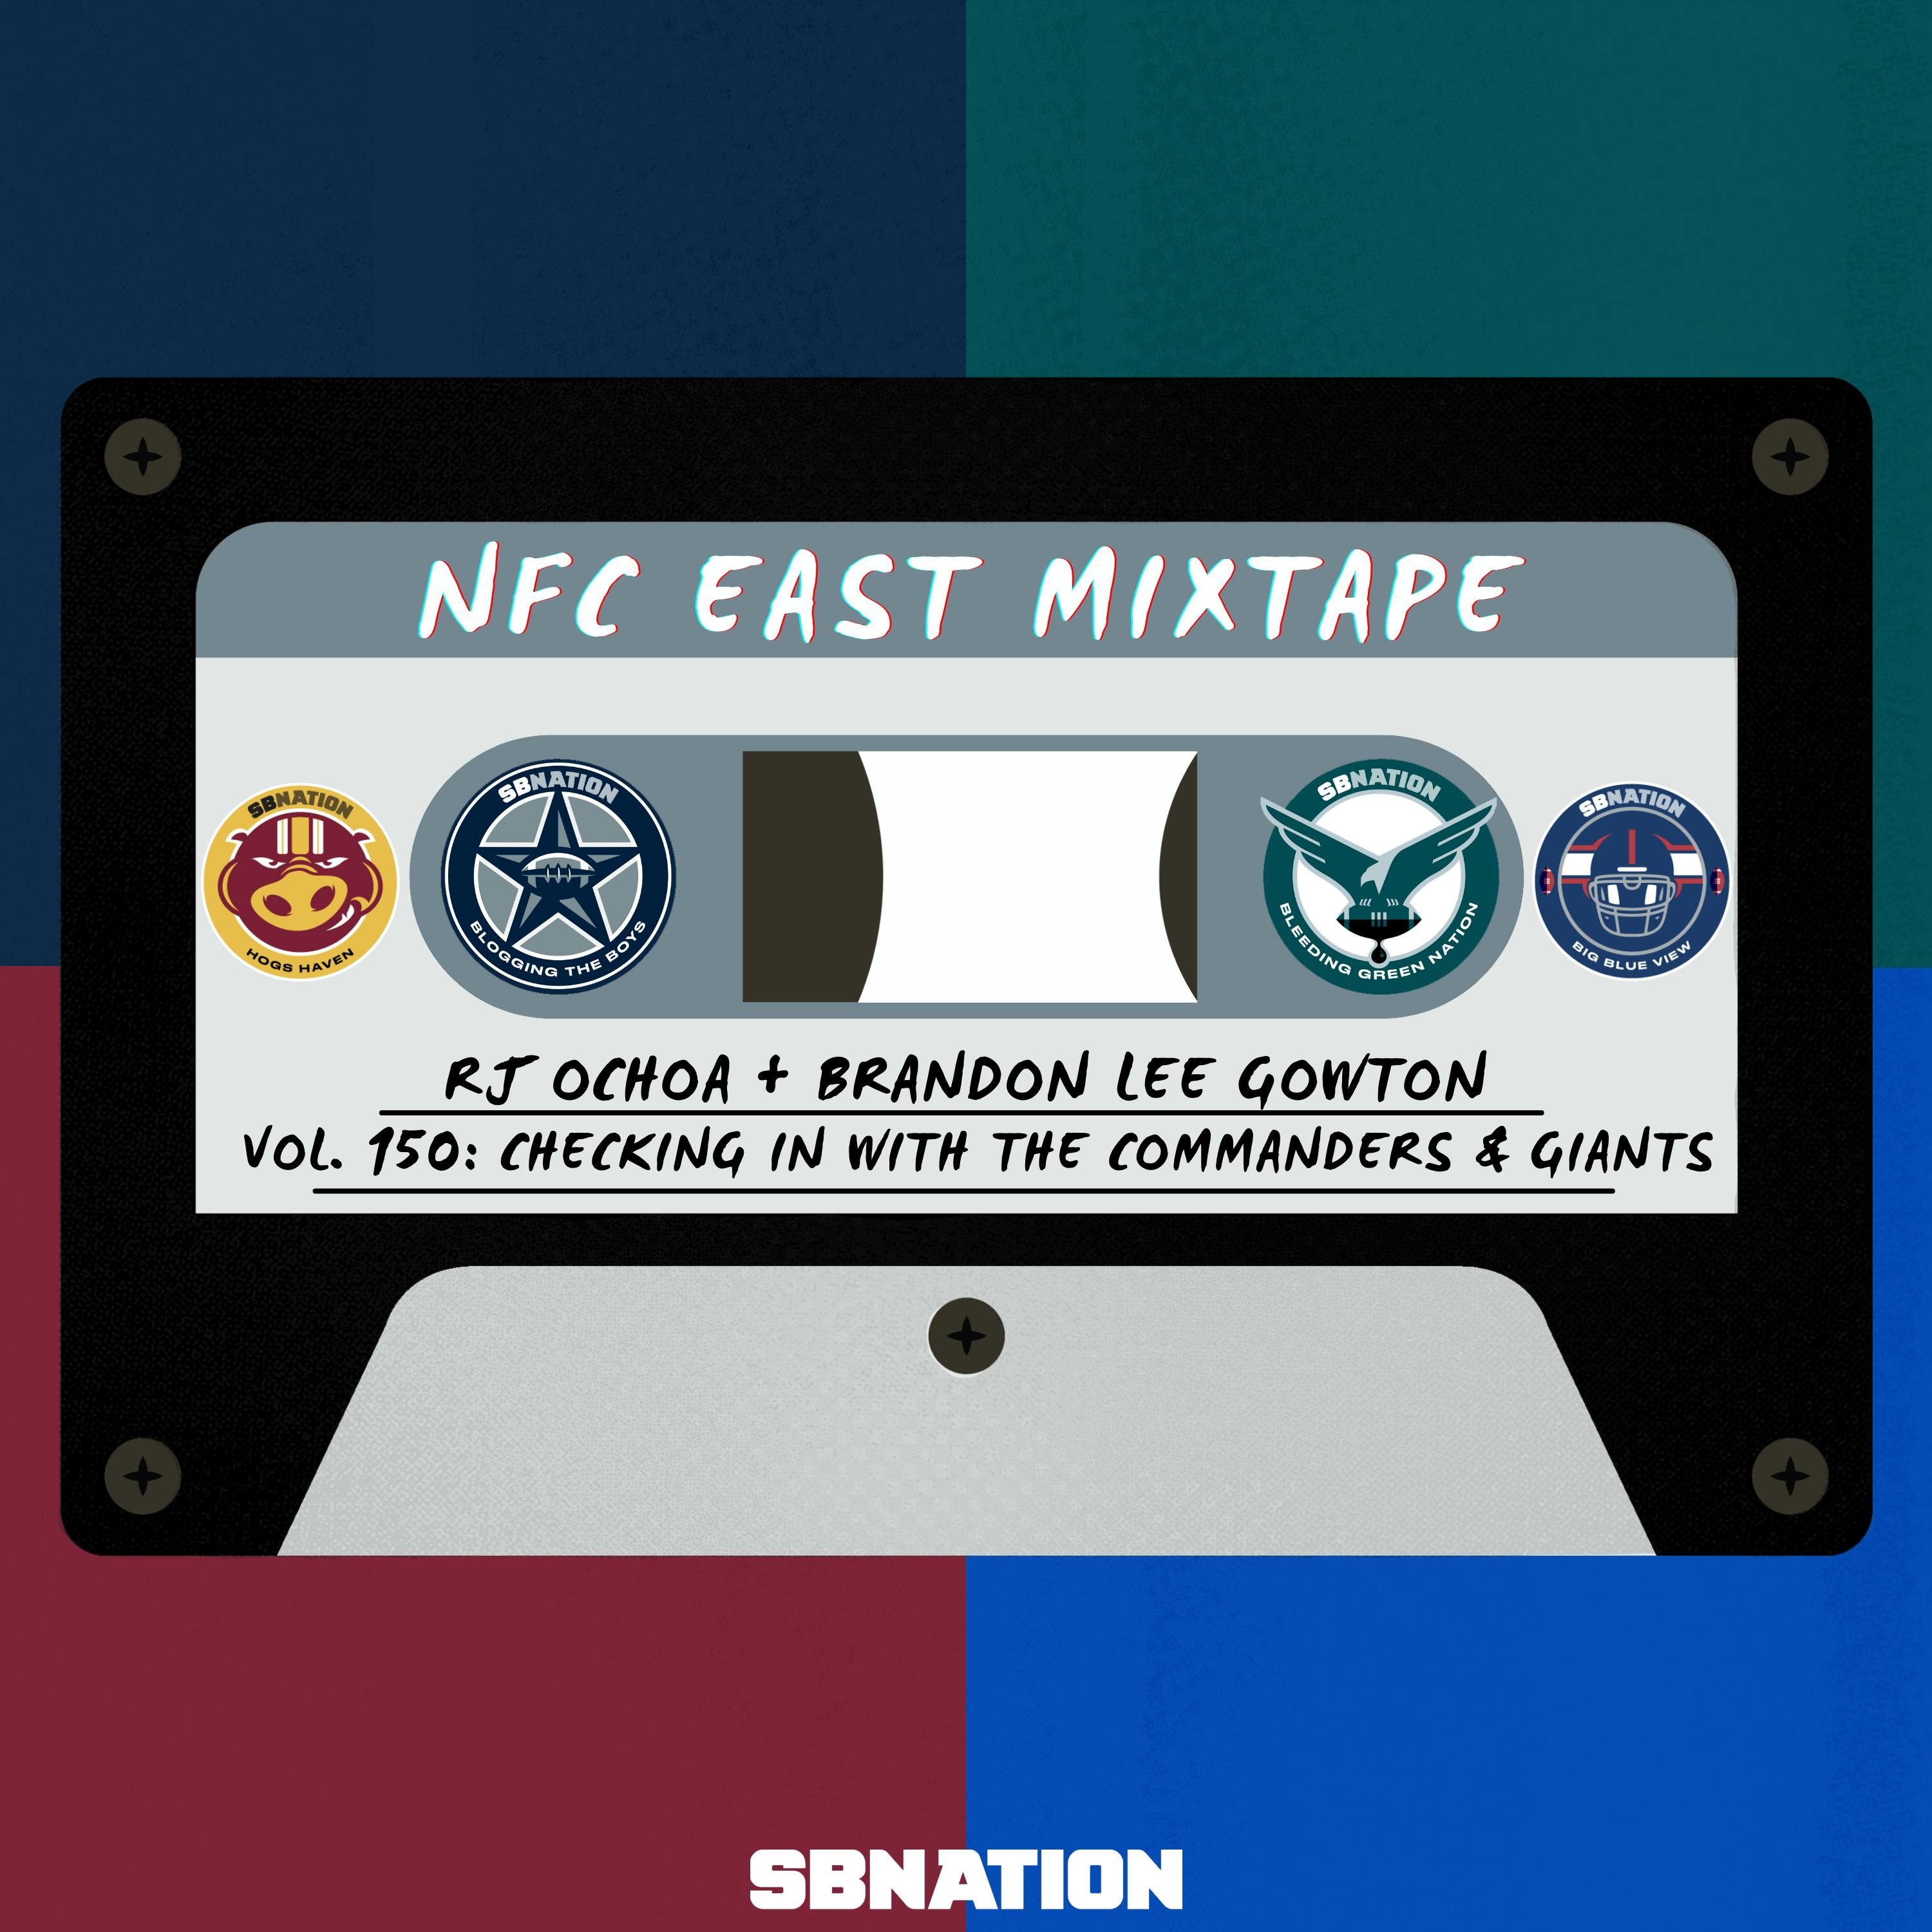 NFC East Mixtape Vol. 150: Checking in with the Commanders & Giants